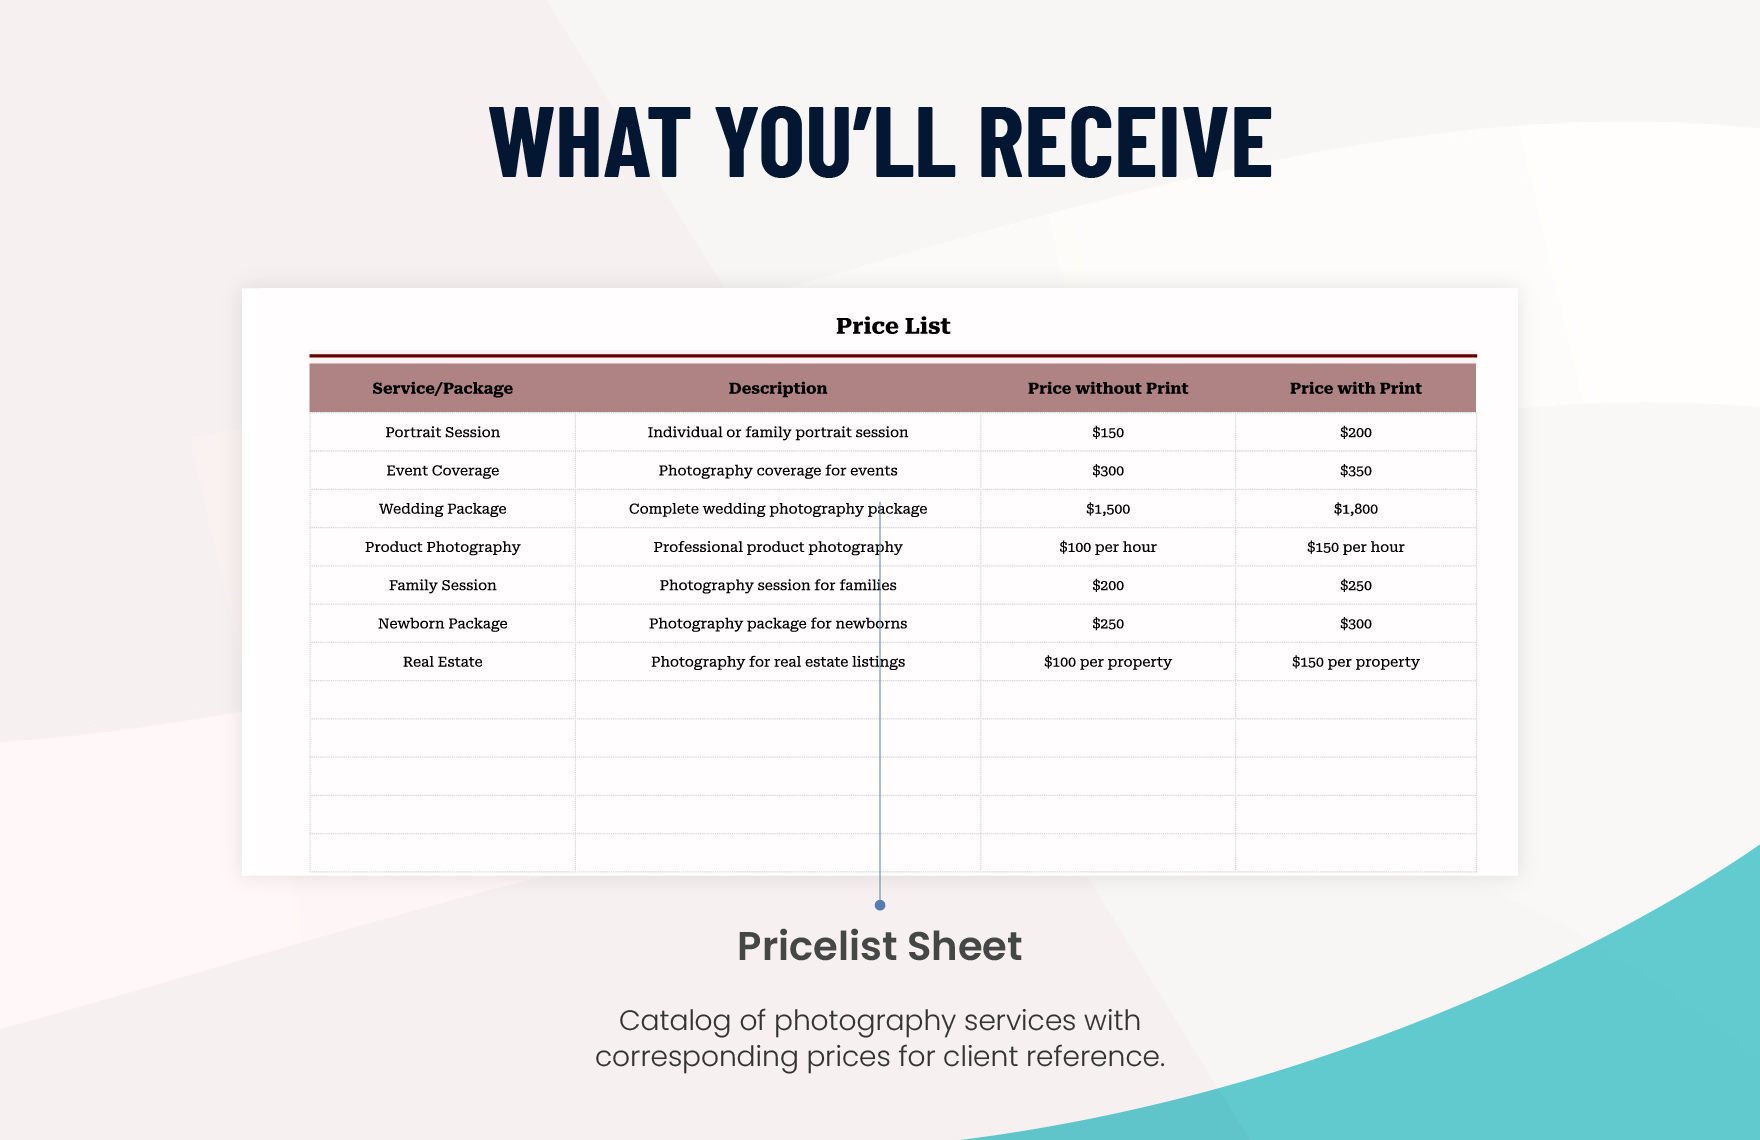 Photography Price Sheet Template